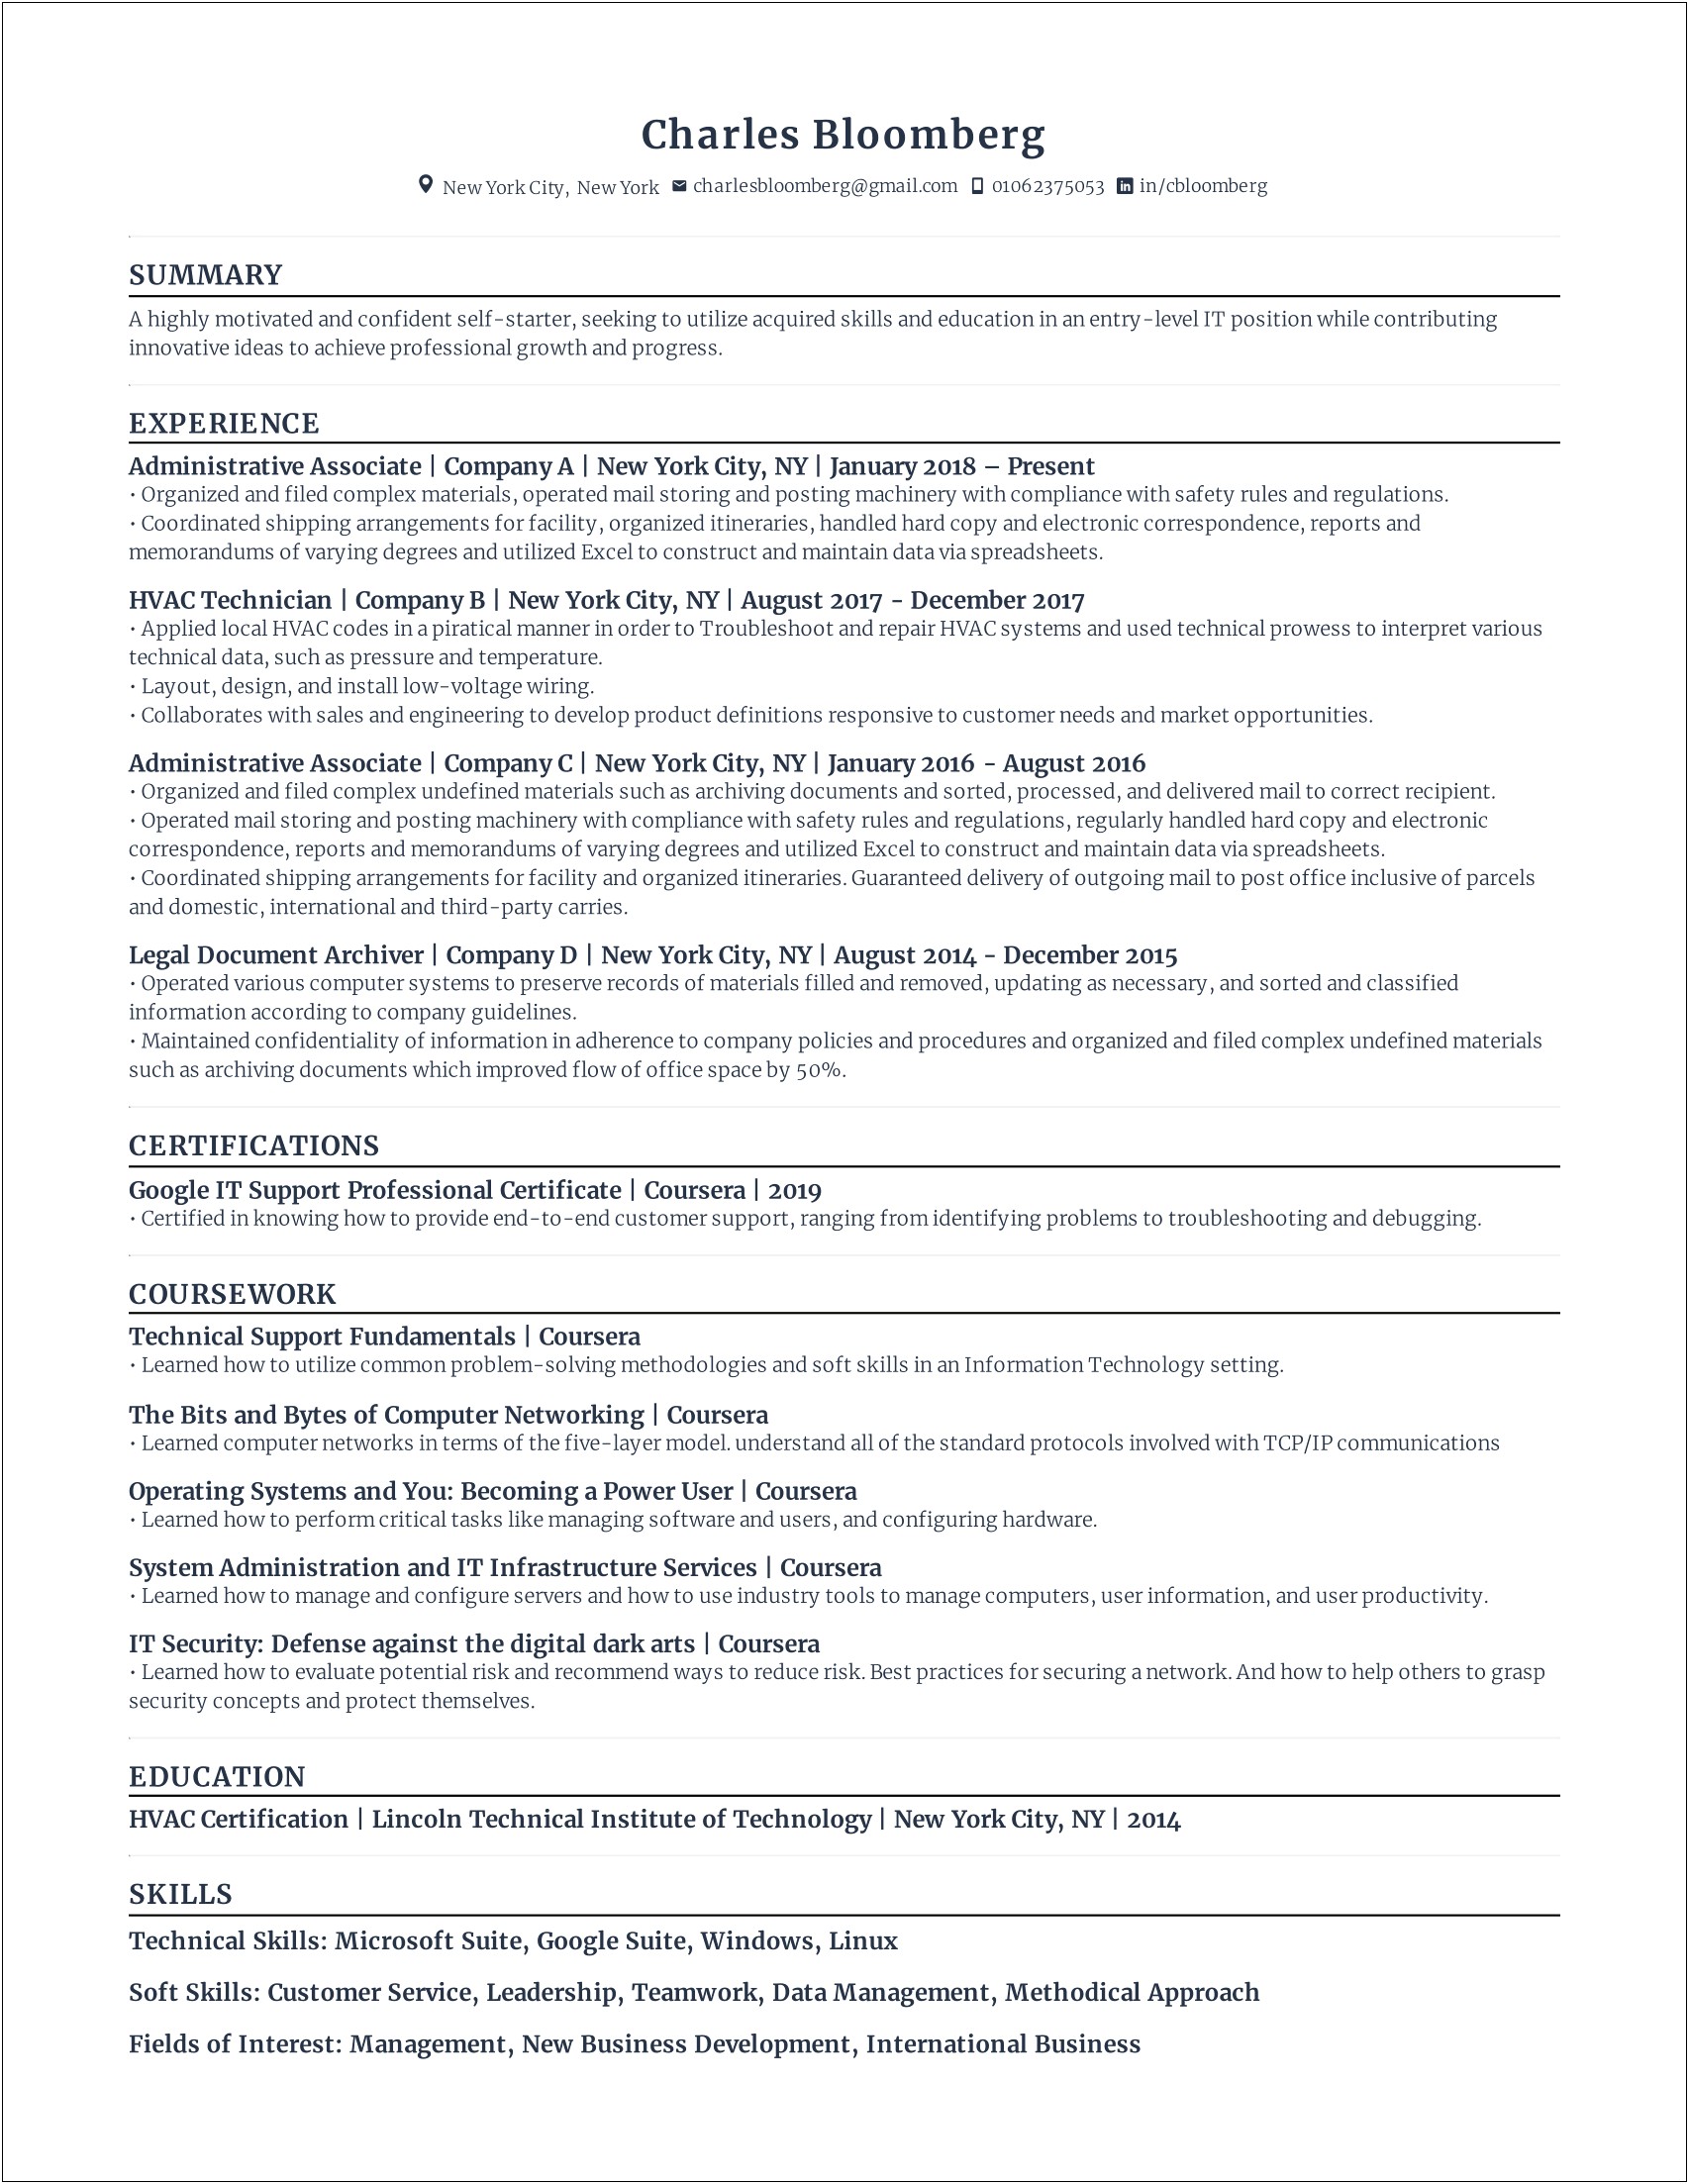 Startup Company Administrative Experience On Resume